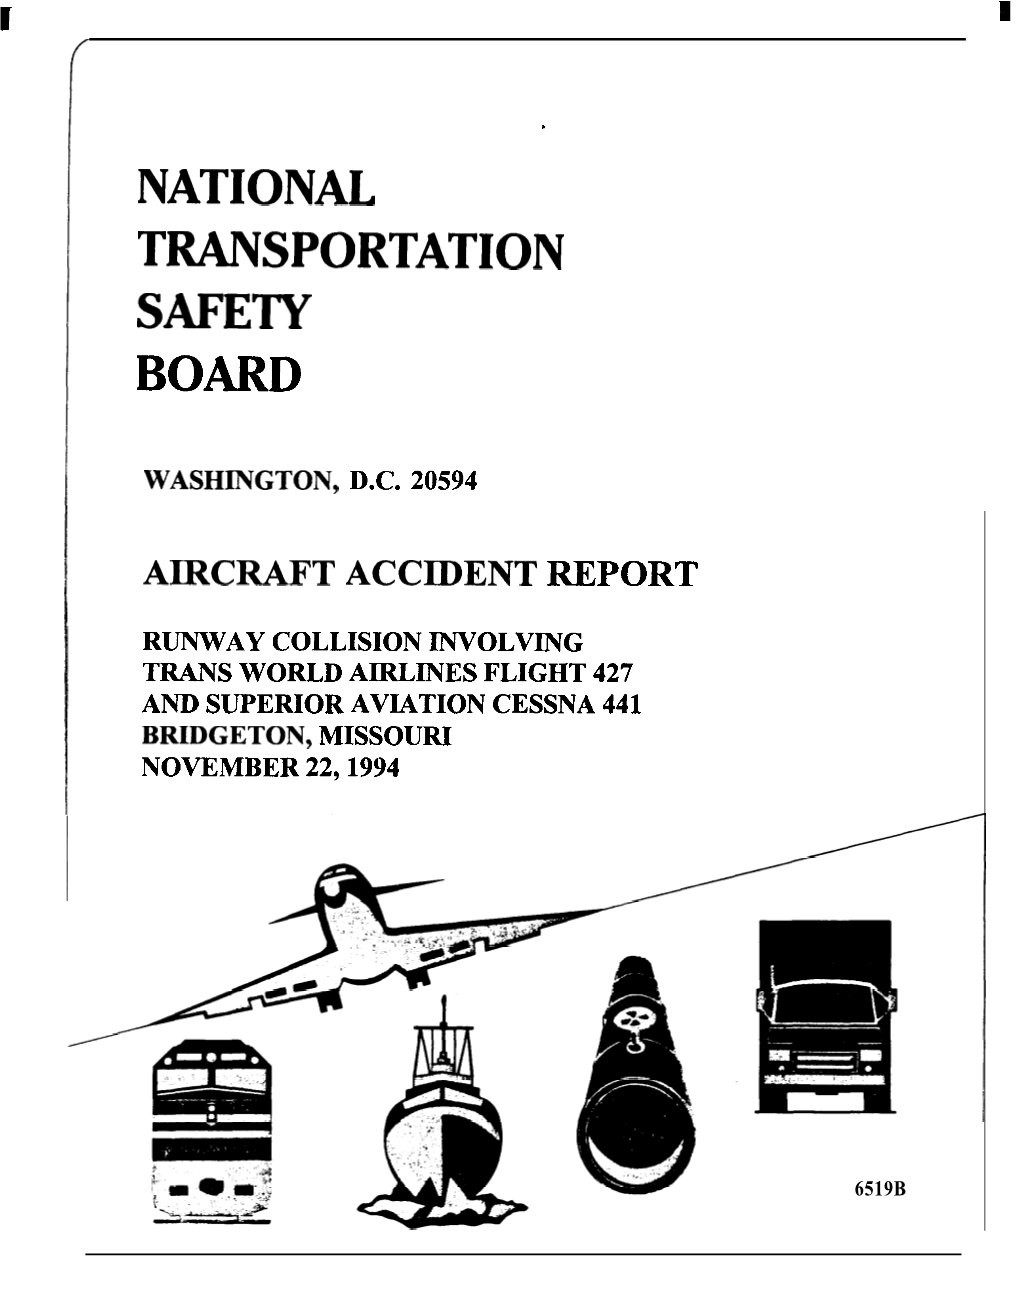 Aircraft Accident Report, Runway Collision Involving Trans World